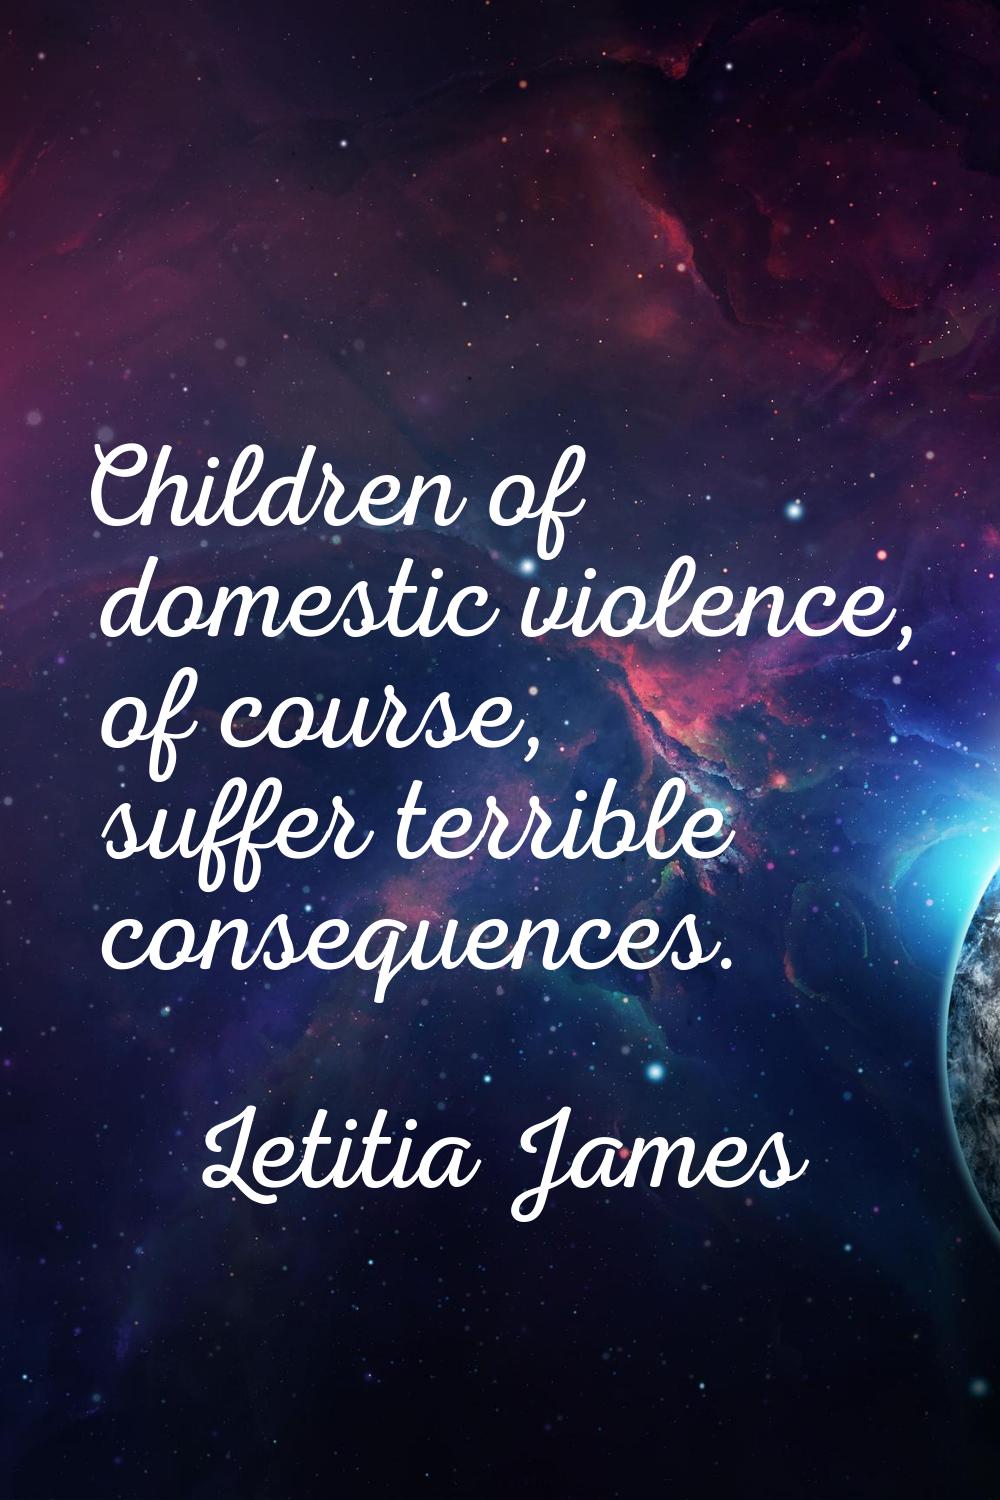 Children of domestic violence, of course, suffer terrible consequences.